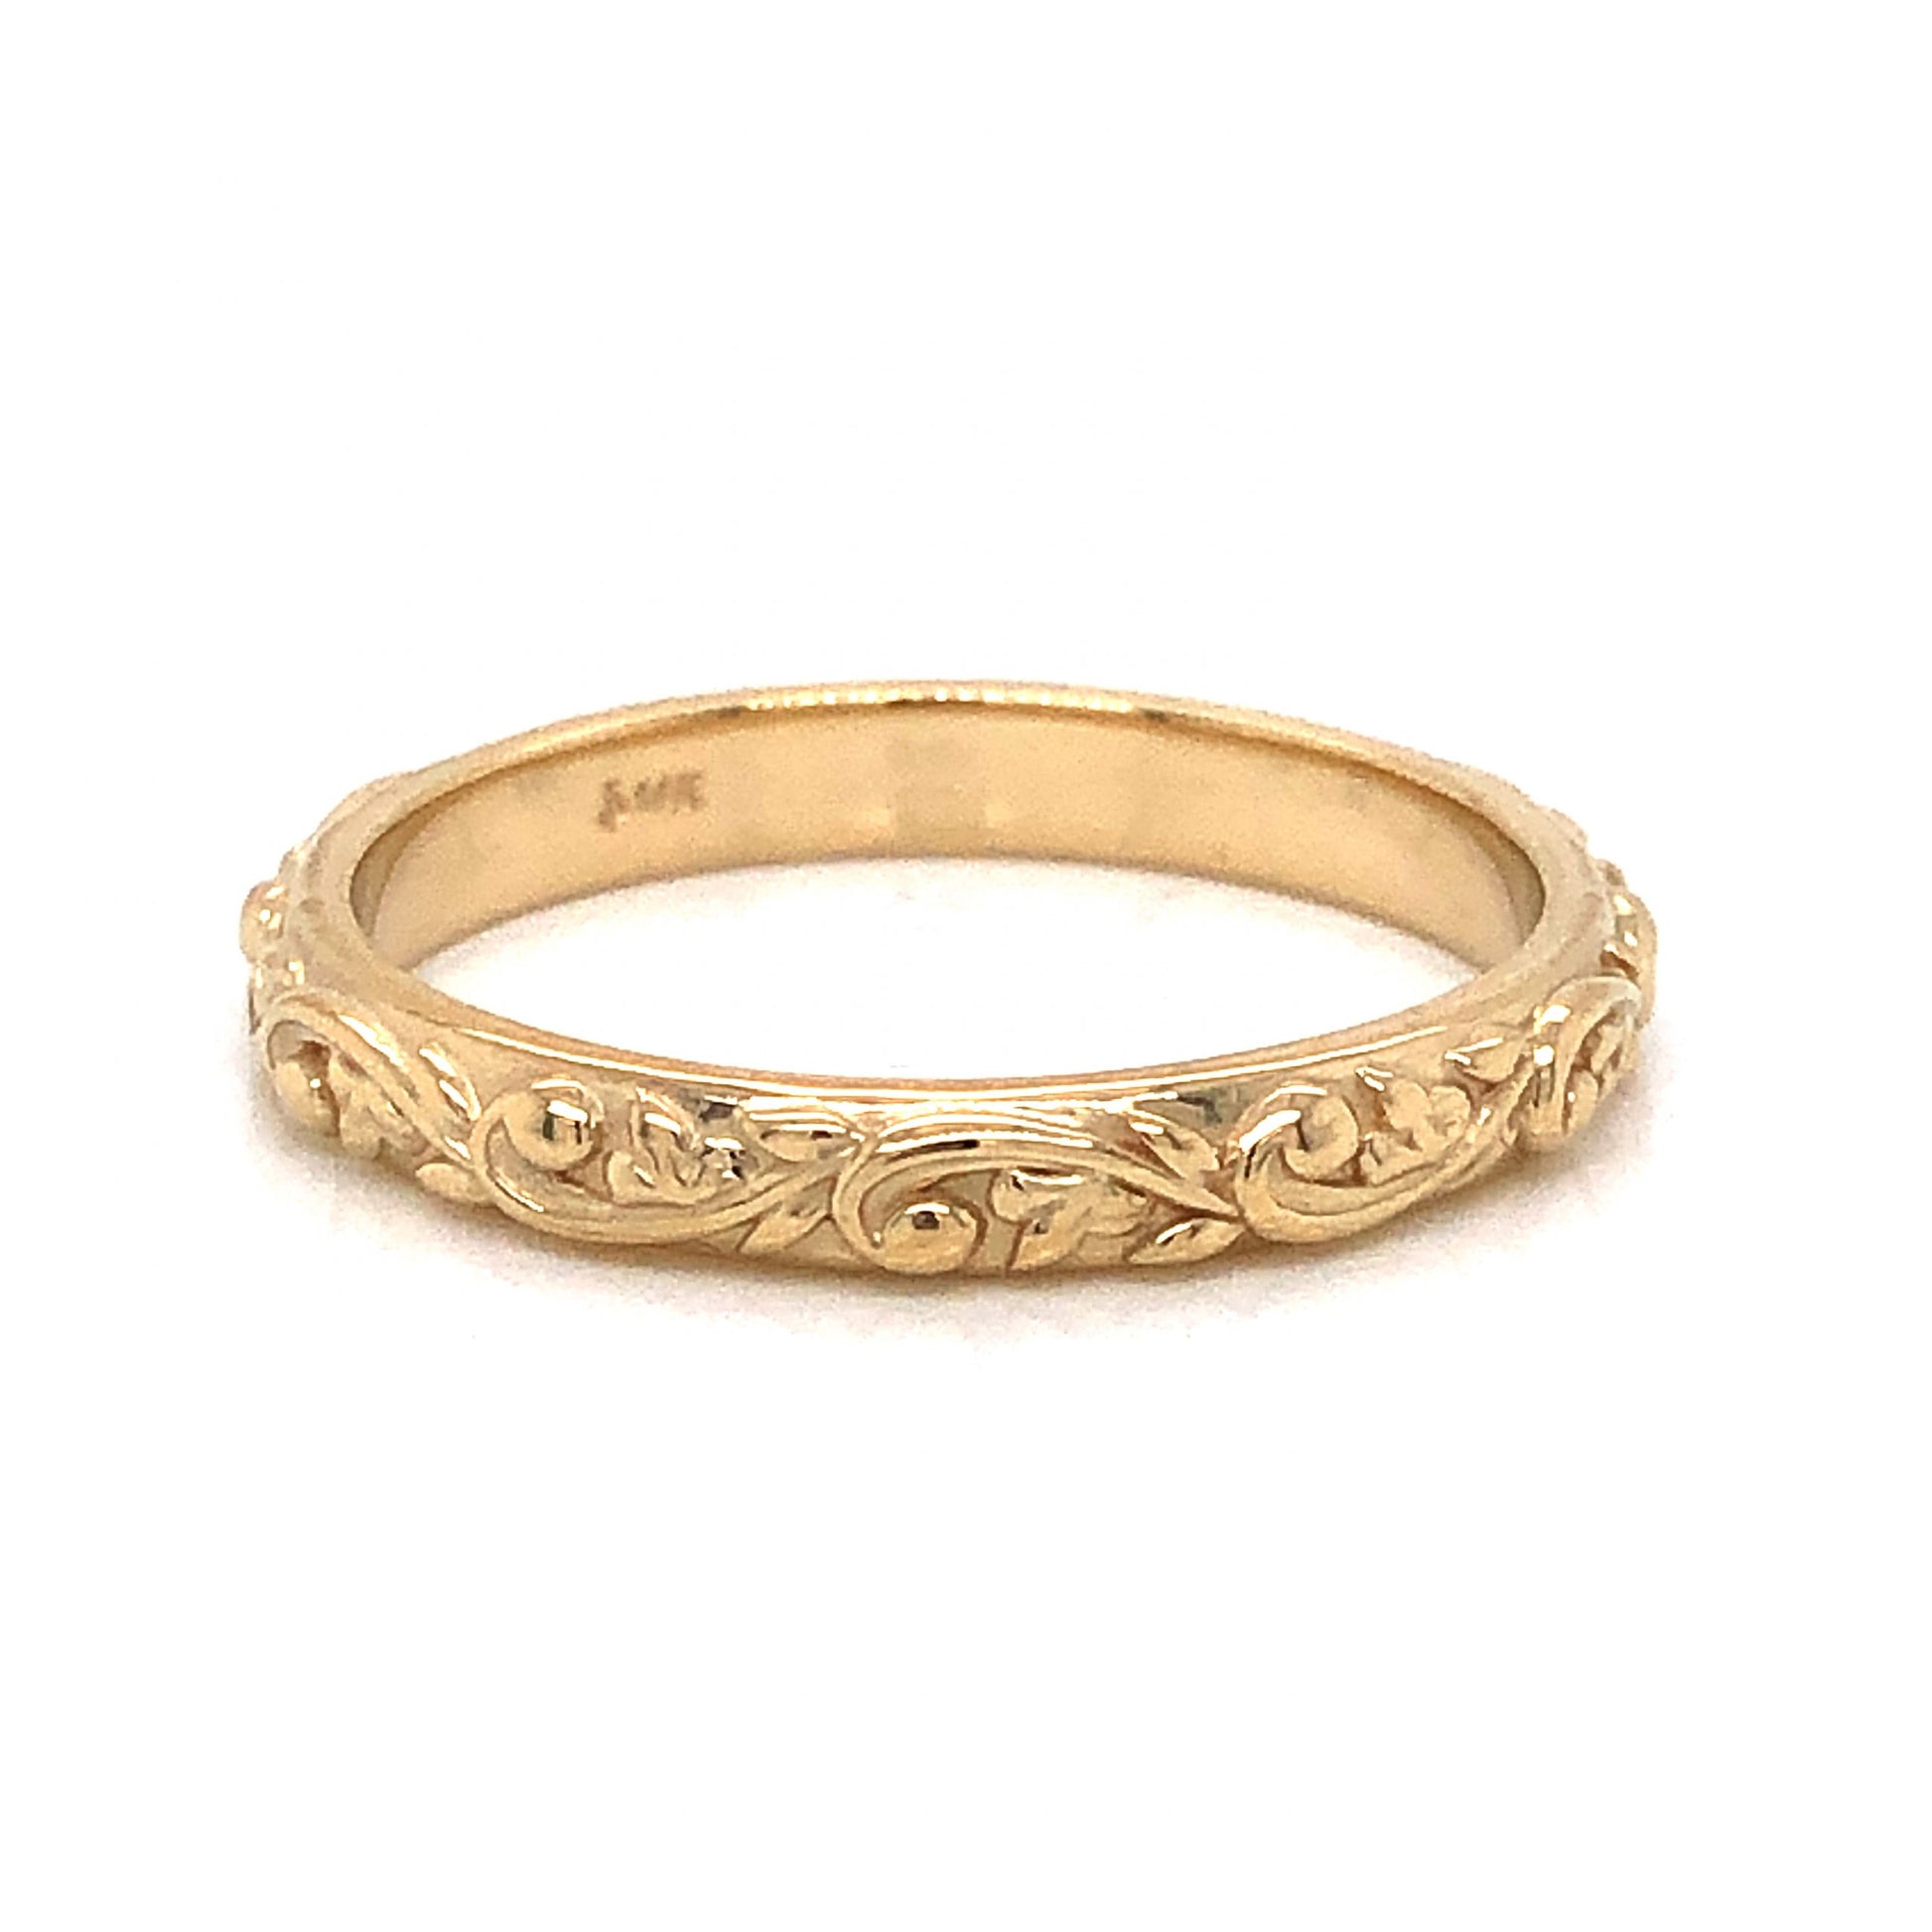 Vintage Inspired Filigree Wedding Band in 14k Yellow GoldComposition: 14 Karat Yellow Gold Ring Size: 7 Total Gram Weight: 2.9 g Inscription: 14k
      